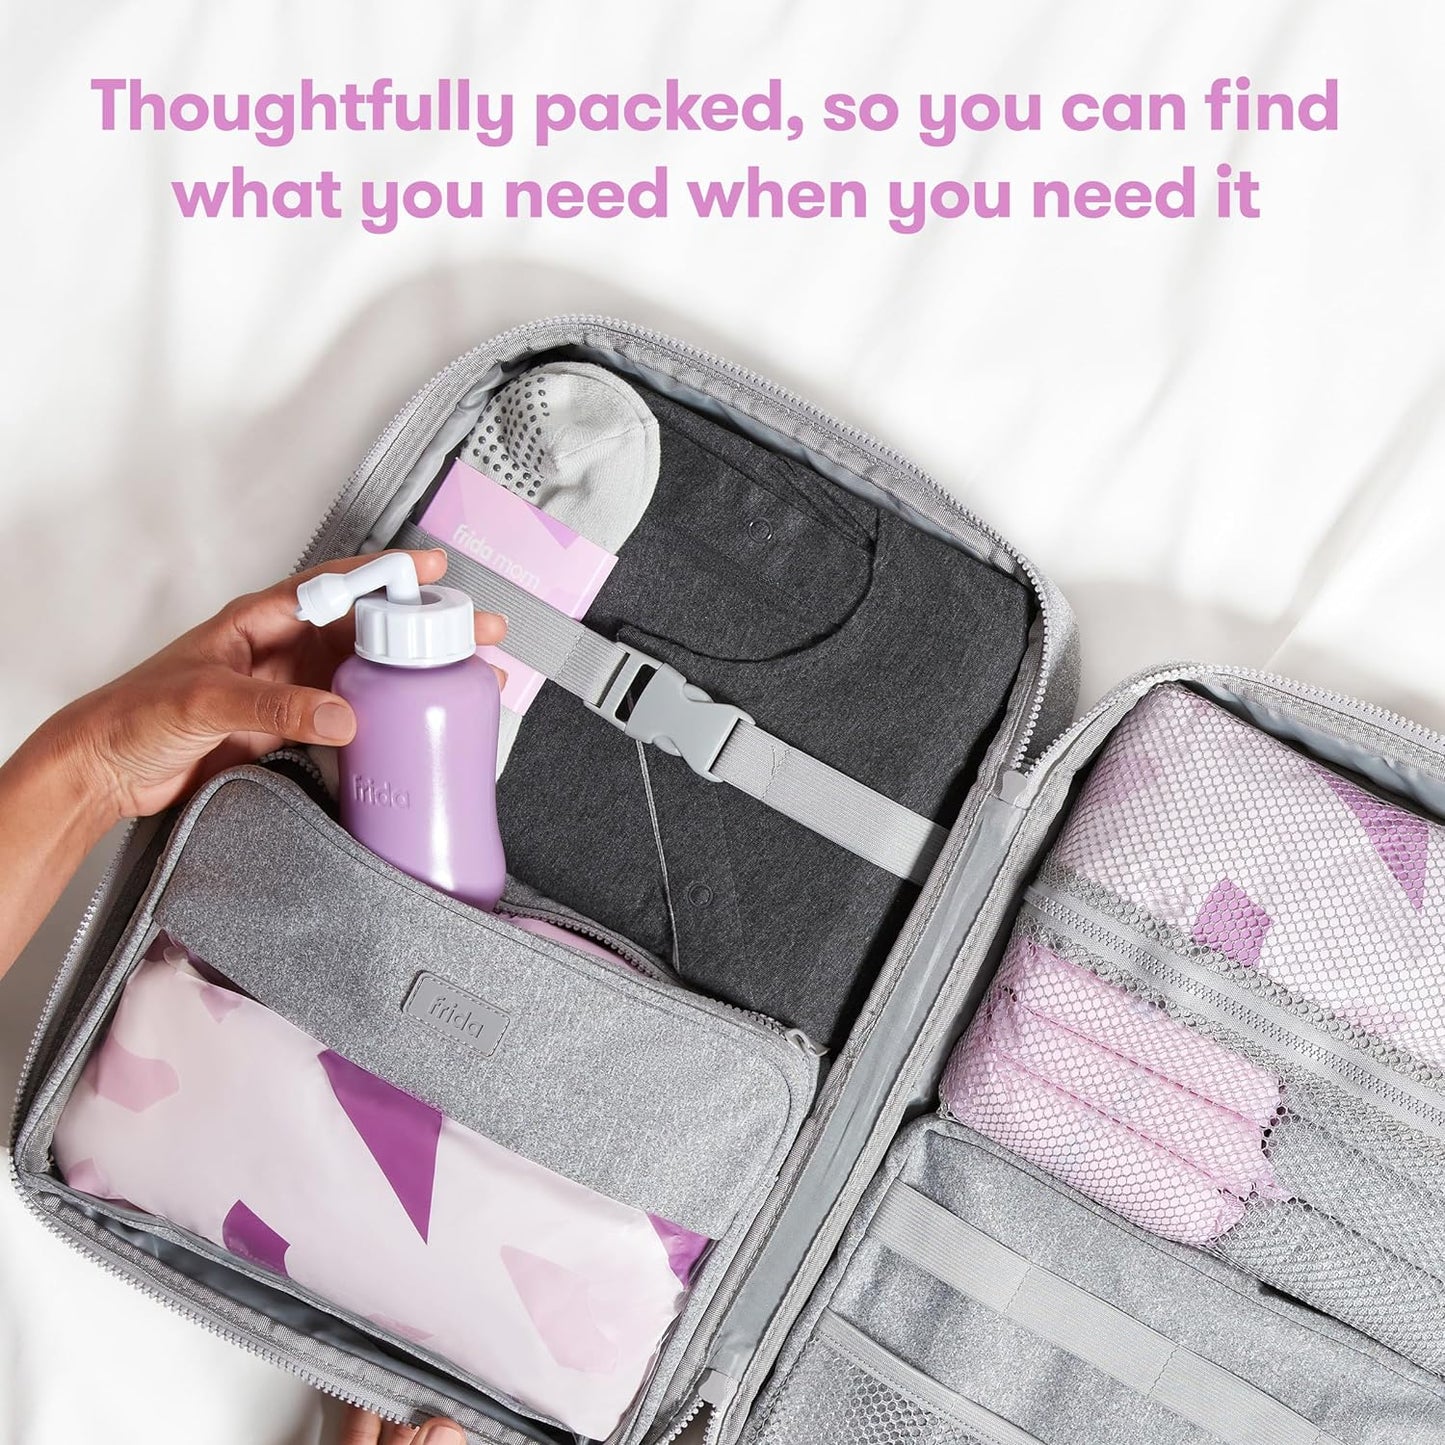 Pre-Packed Hospital Bag Essentials for Labor and Delivery, Postpartum Recovery